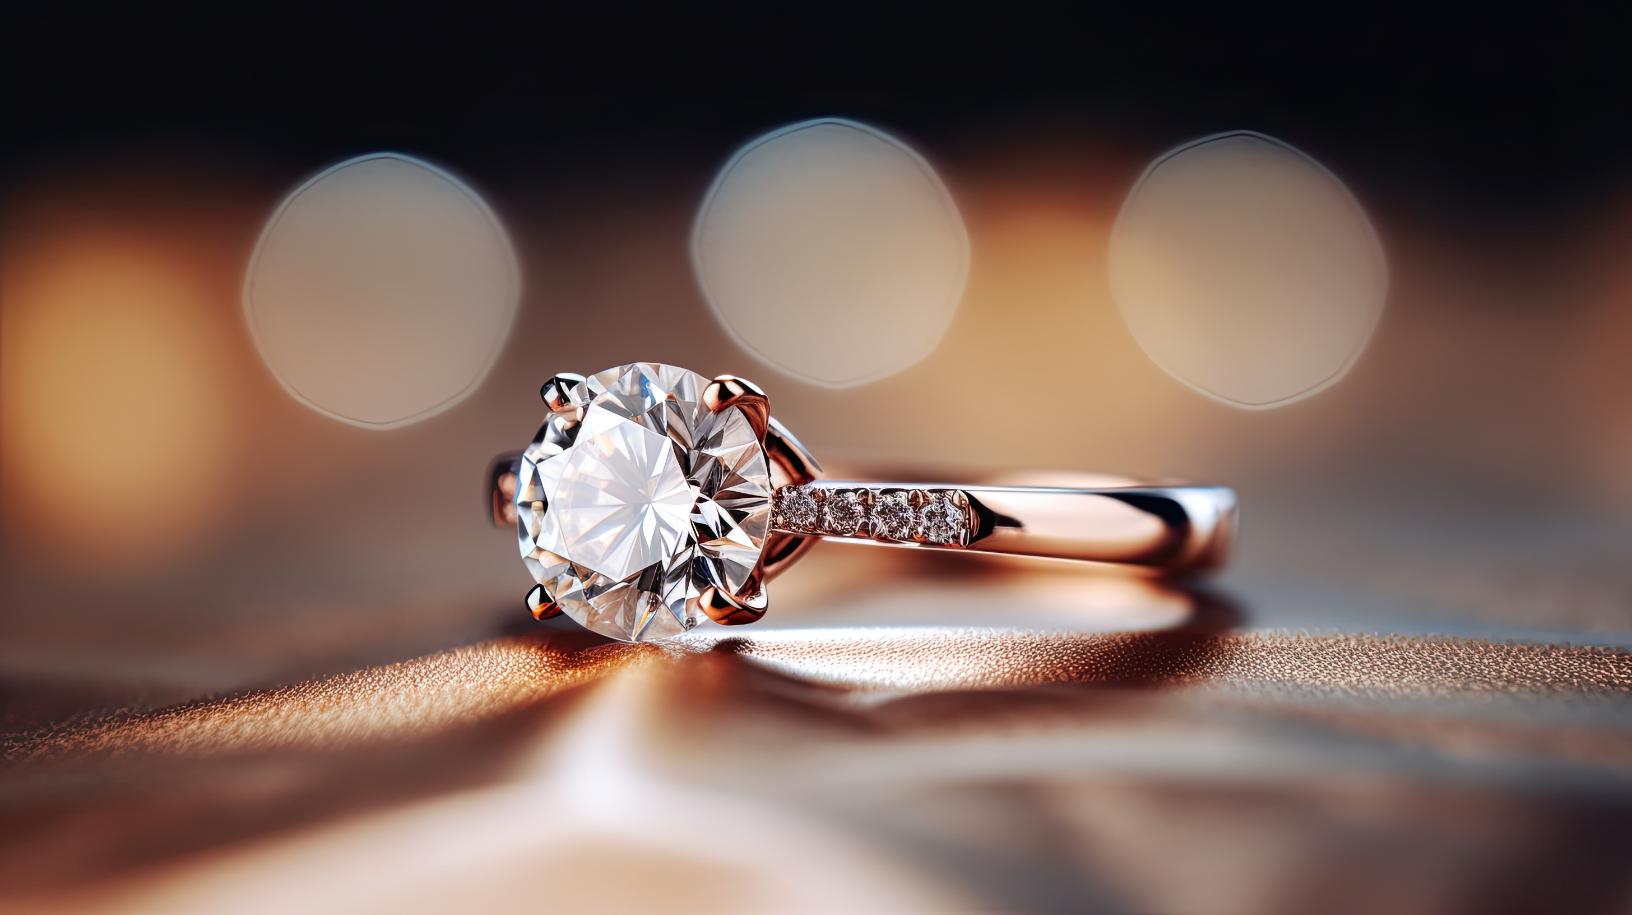 Caring For Your Diamond Ring Maintenance Tips To Keep It Shining